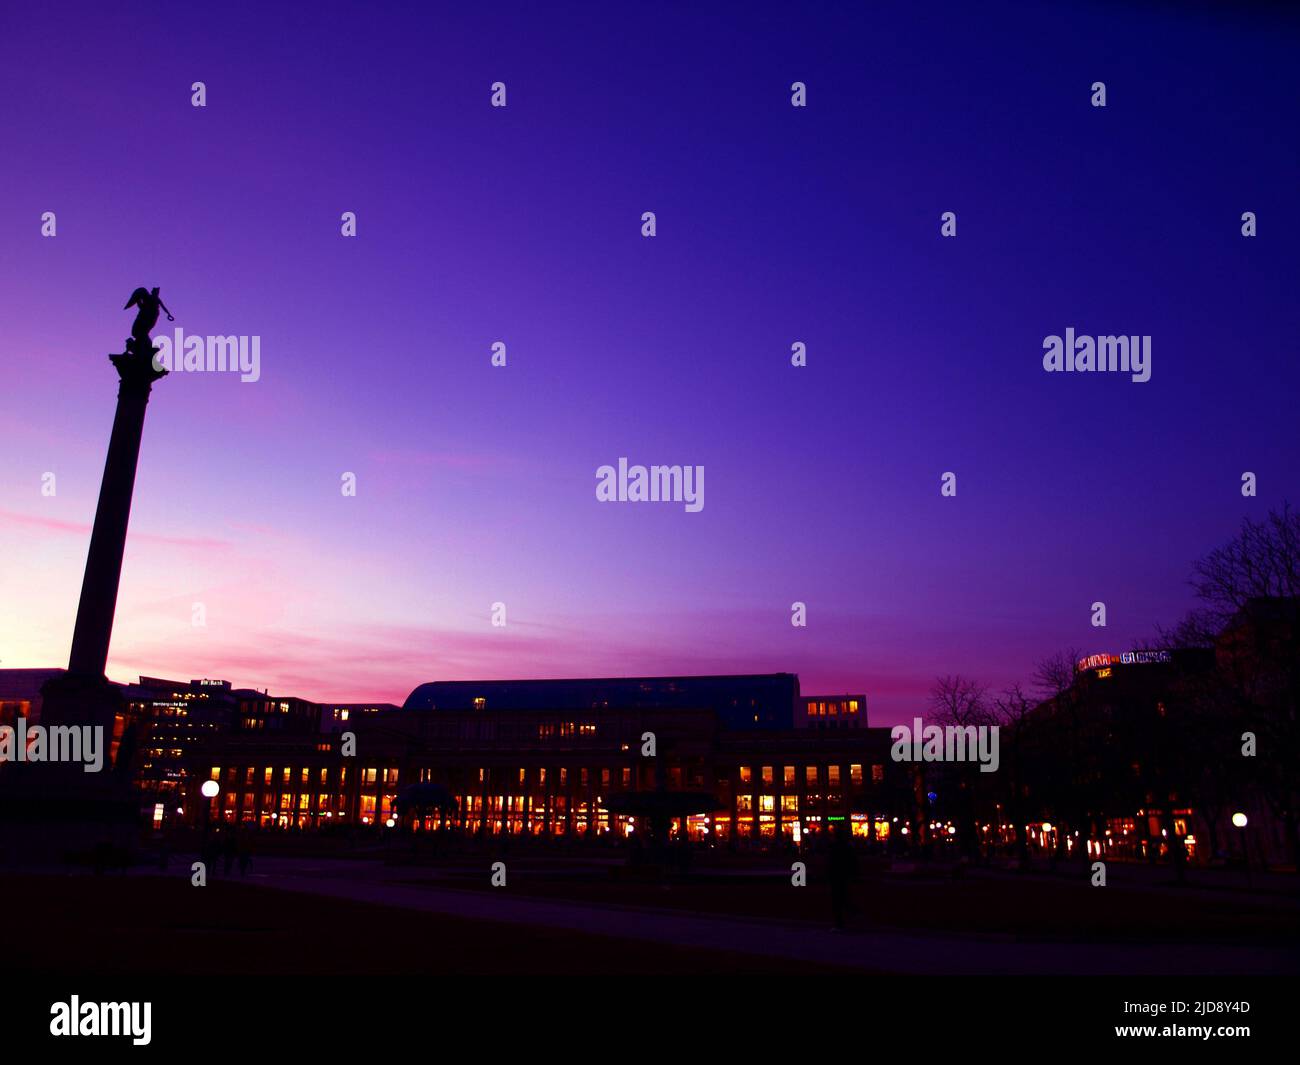 Street of the Kings. Silhouette and colorful view of Stuttgart Koenigstrasse by night. Stock Photo